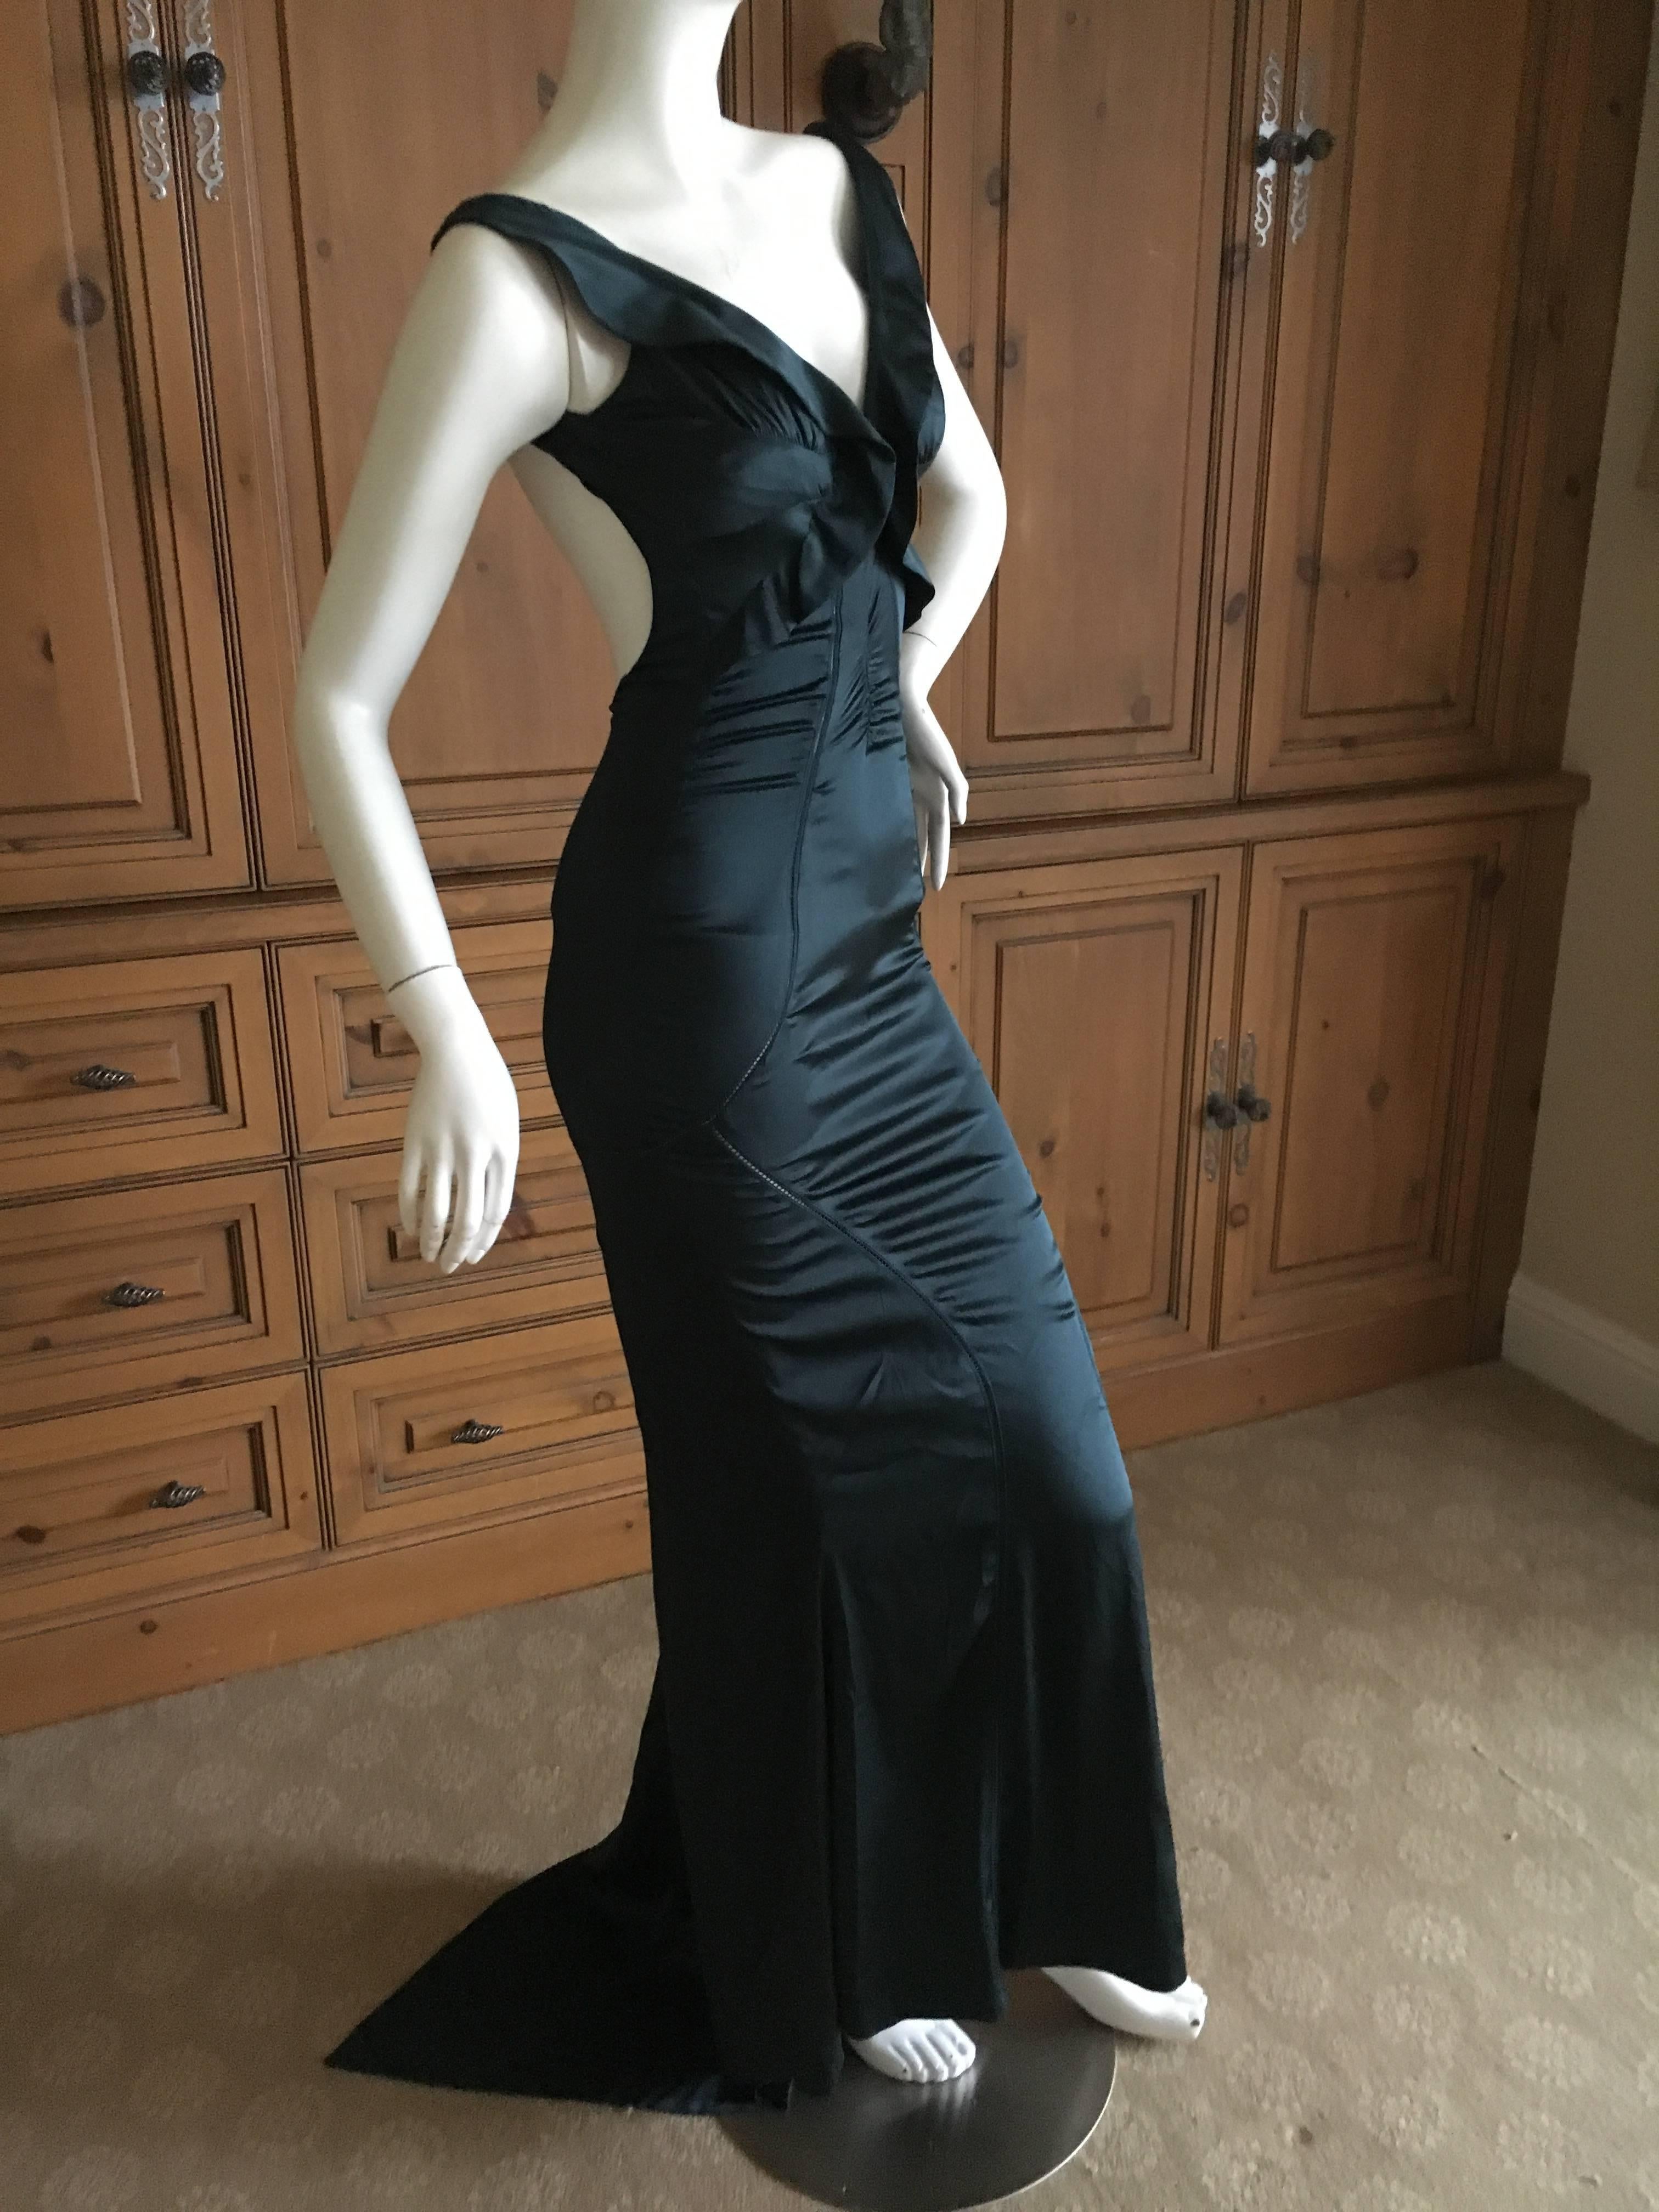 Gucci by Tom Ford Sexy Backless Green Silk Evening Dress.
This is so pretty, photos don't capture this.
Size 40
Bust 36